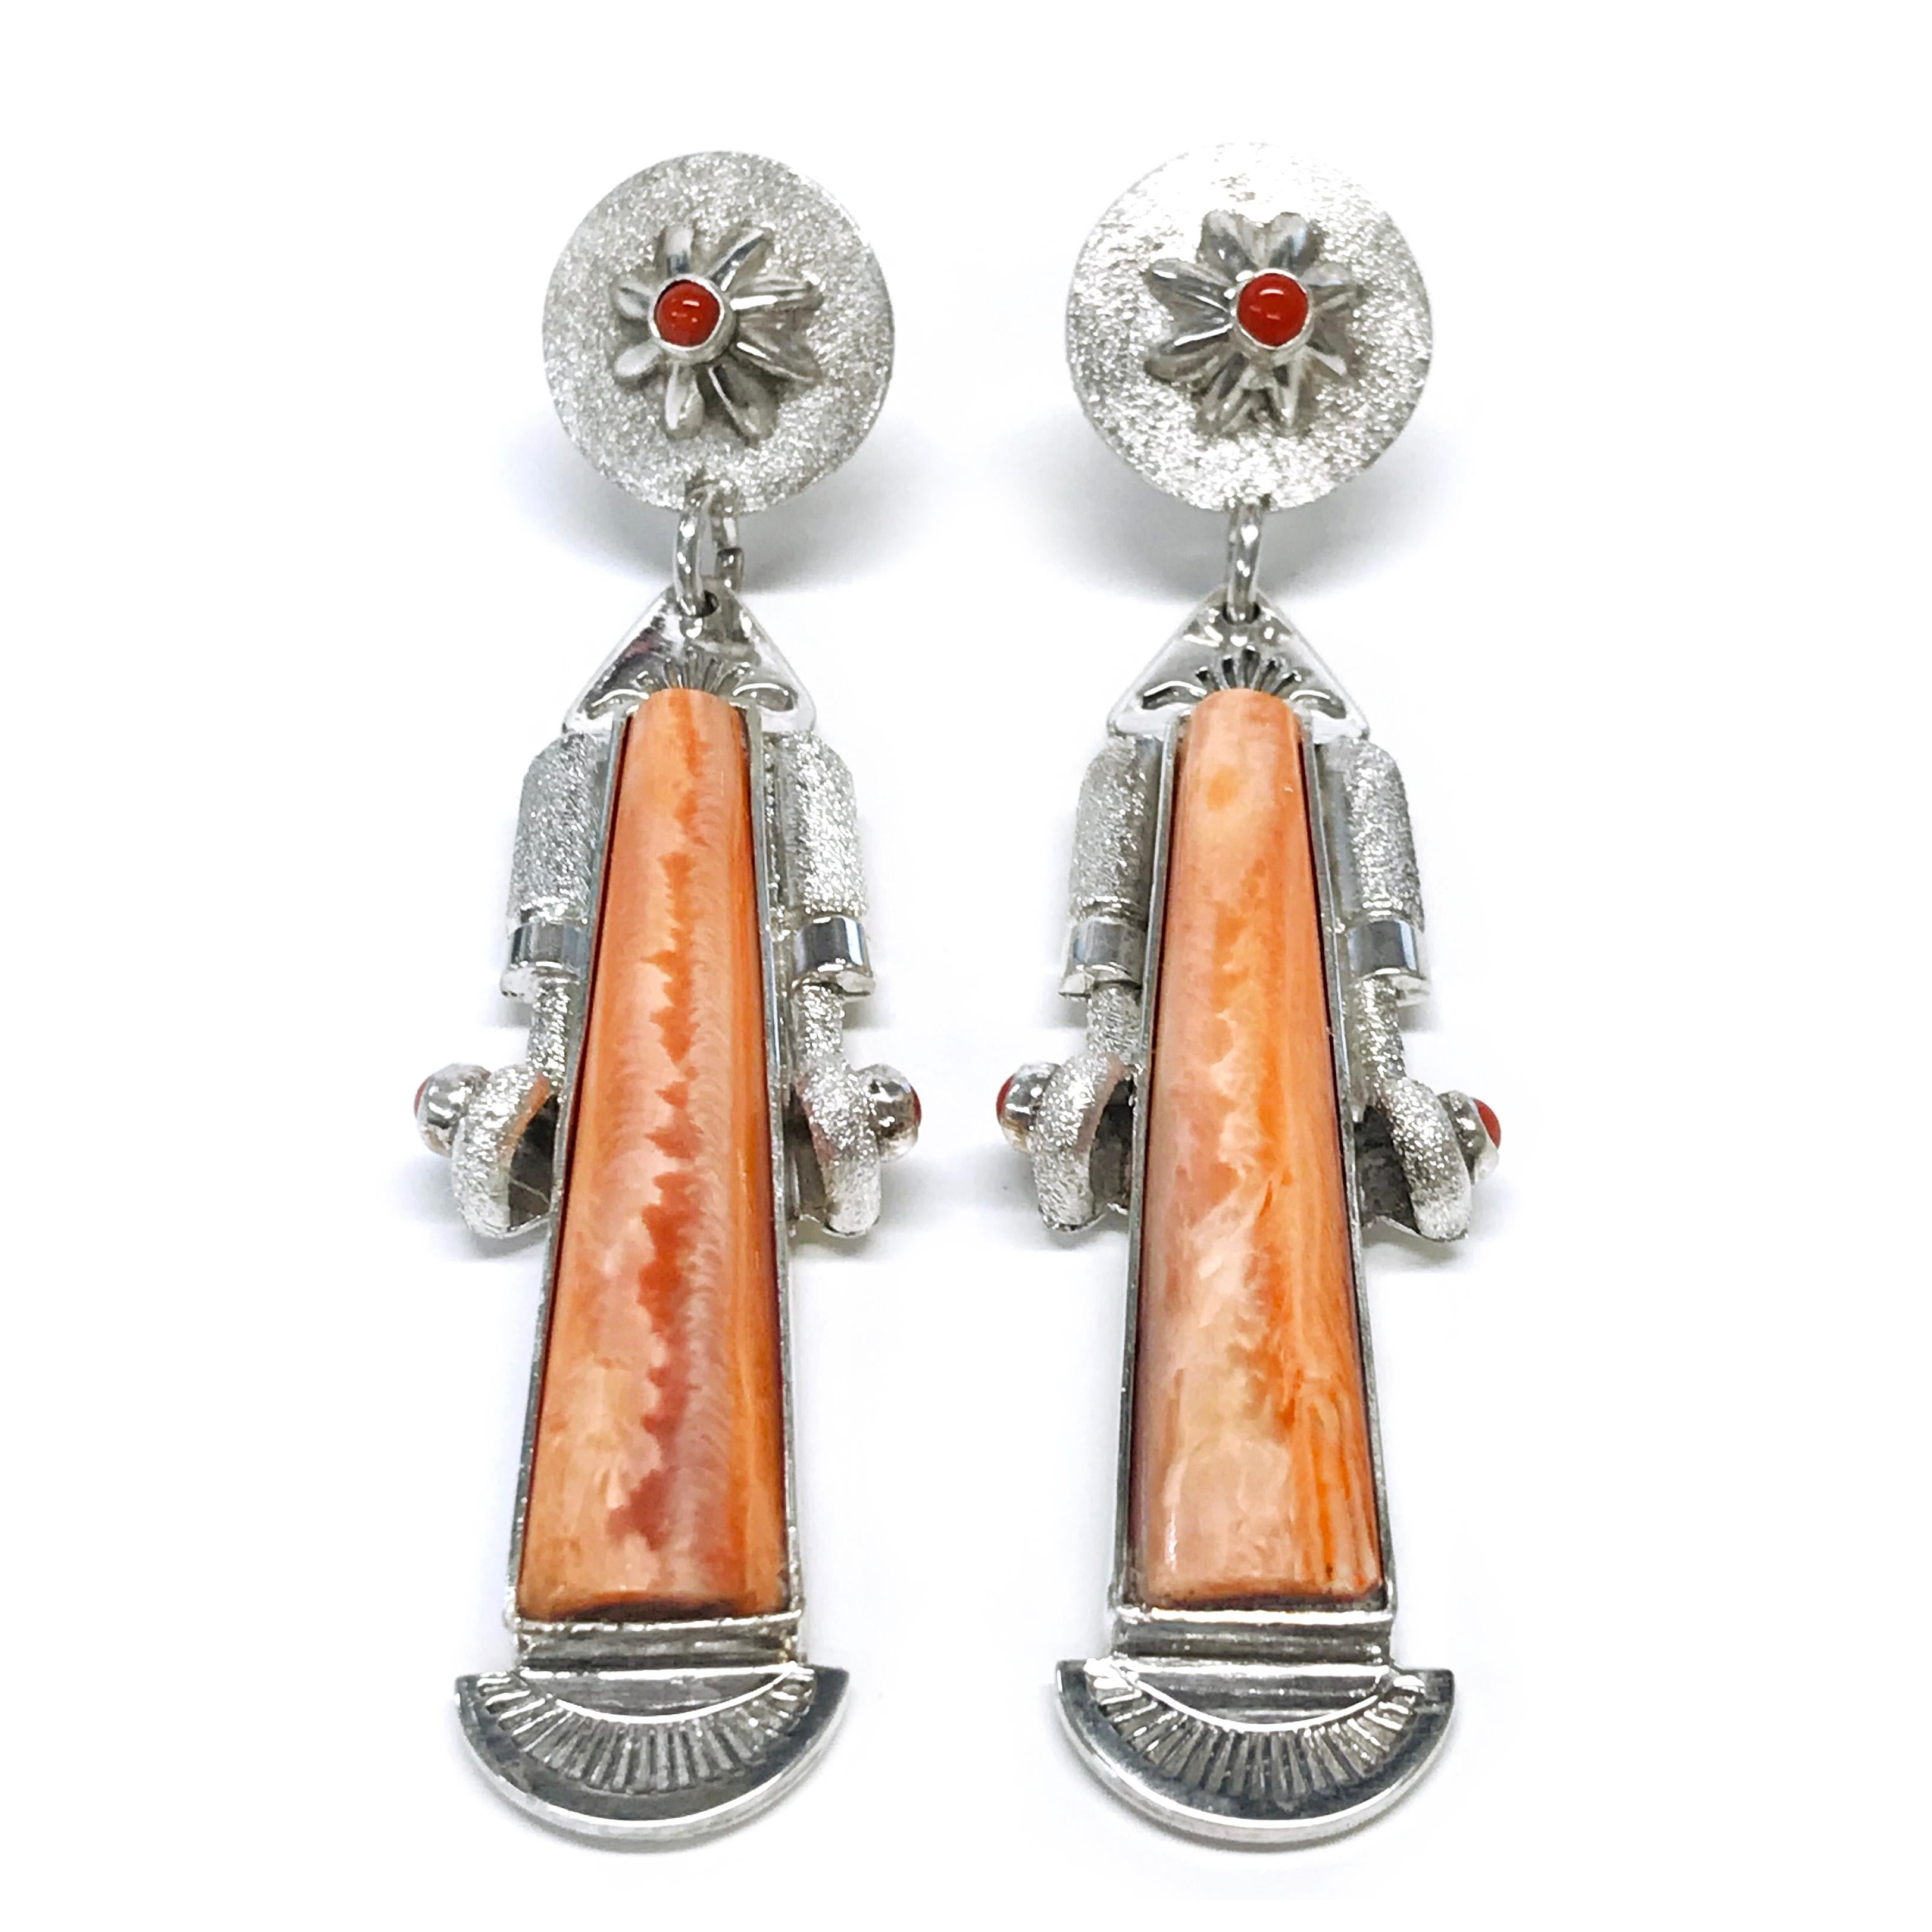 Handcrafted from Sterling Silver with 14 karat accents by jewelry maker, Ray Winner. These unique earrings feature an orange fluted-shape Spiny Oyster cabochon and Mediterranean Coral round cabochons. Three Mediterranean Coral round cabochons are